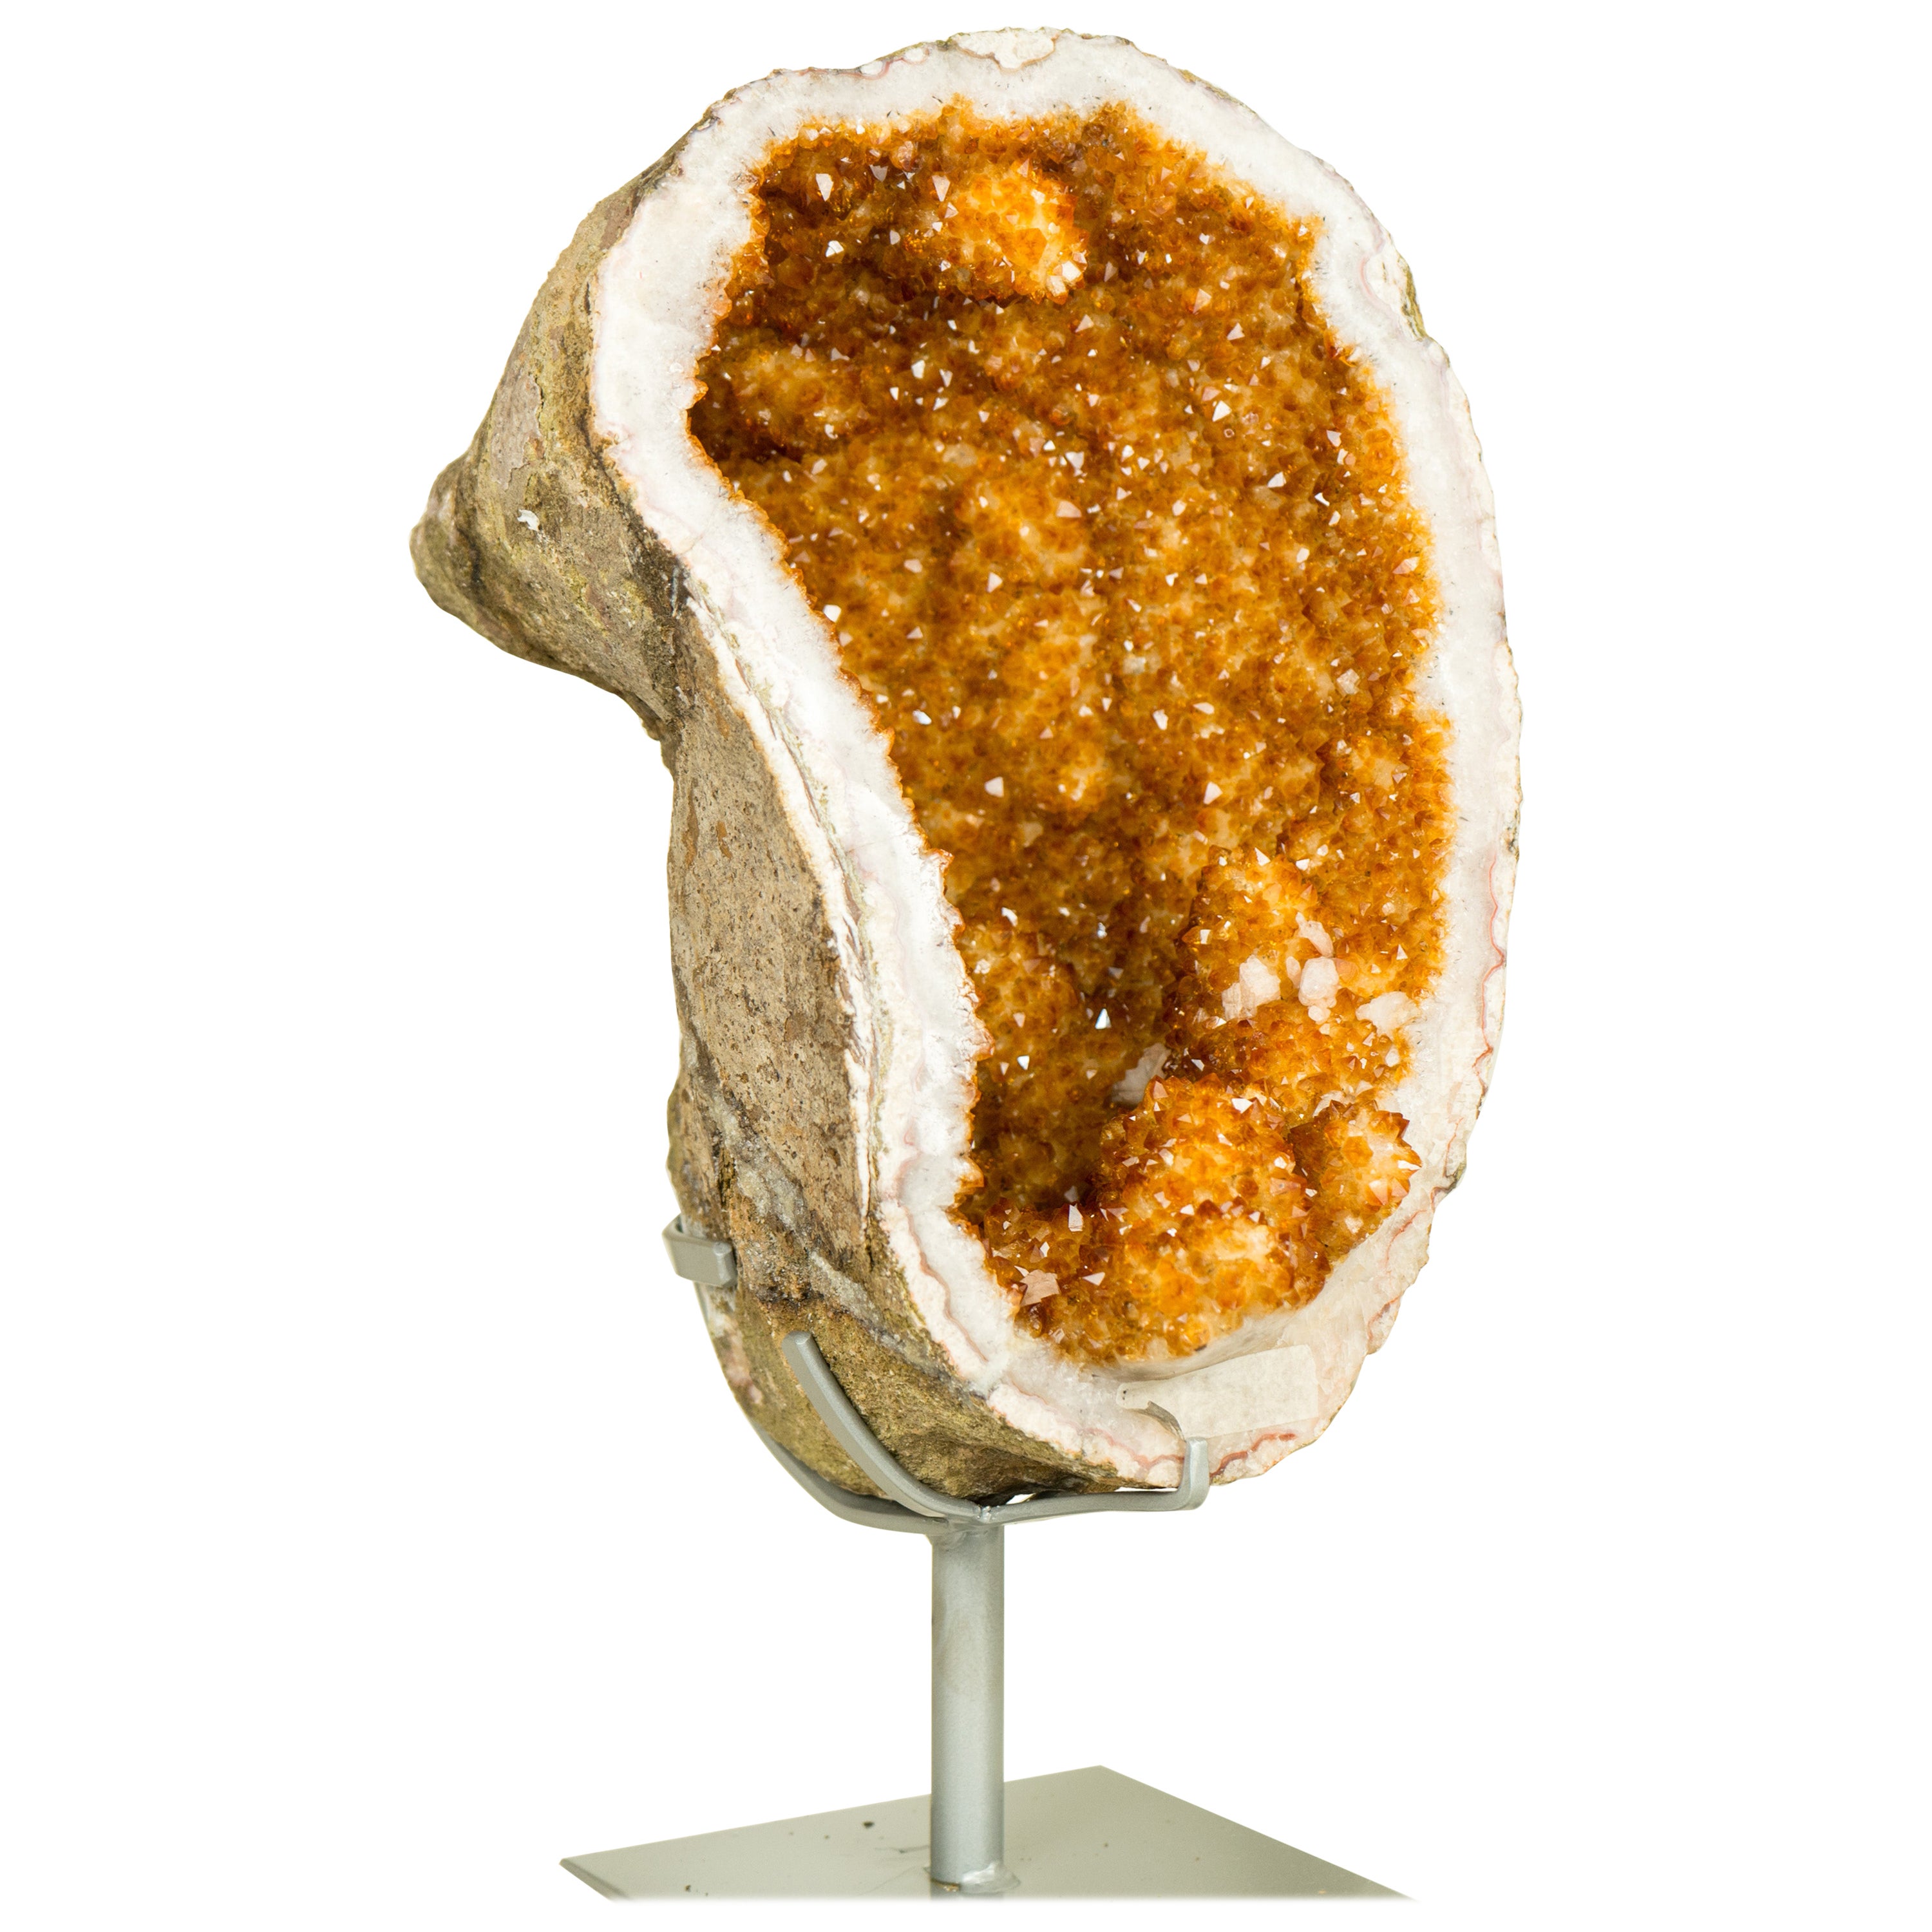 Citrine Geode with Stalactite Flower Formations and Deep Orange Citrine Crystal For Sale